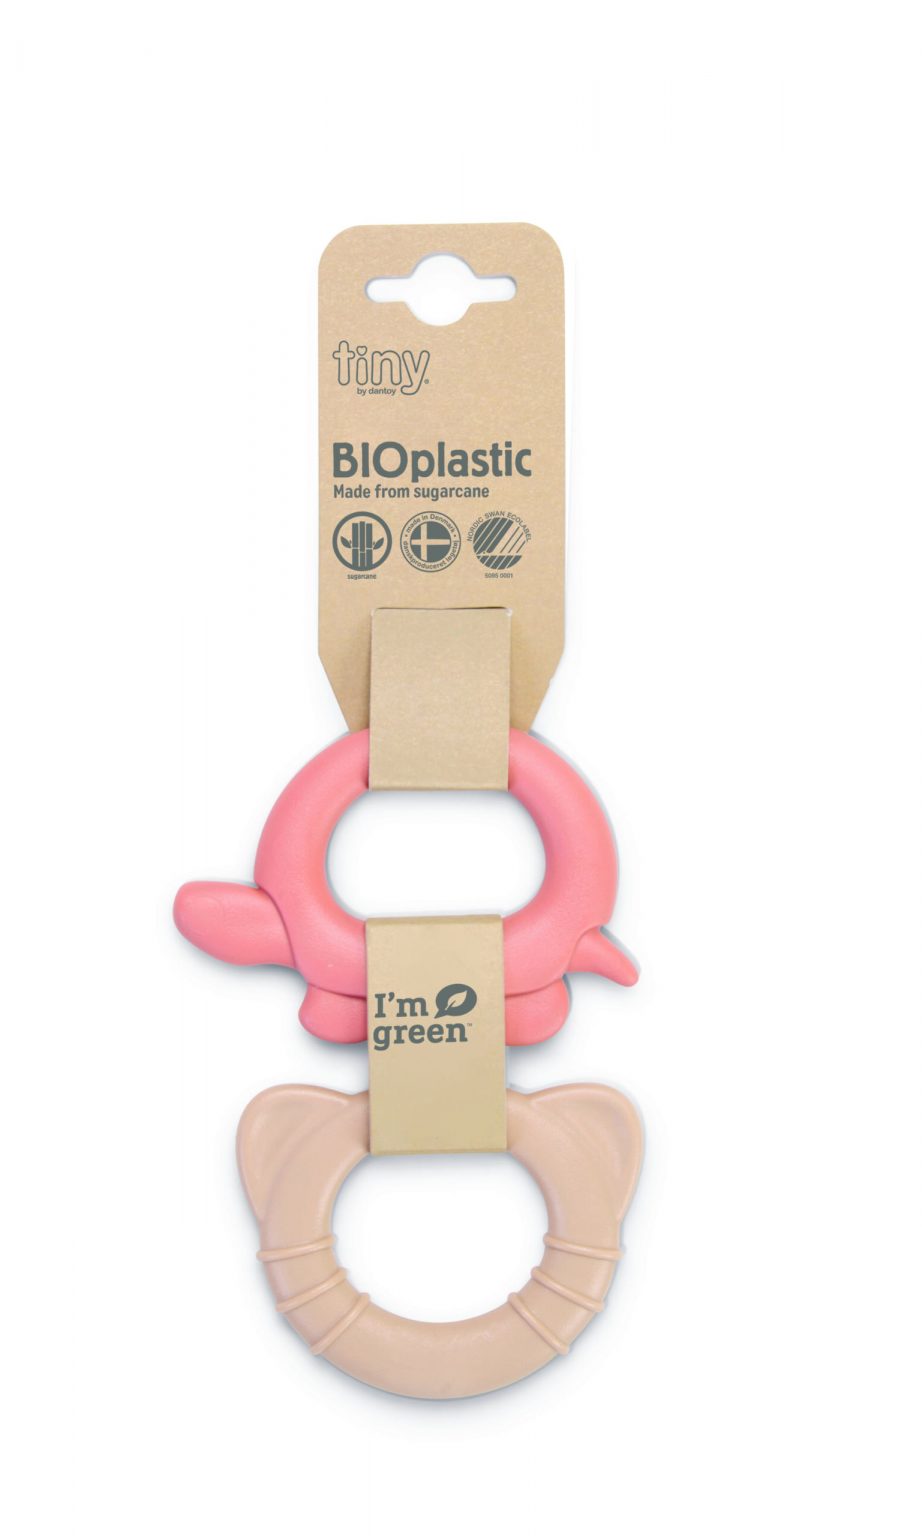 Intellimass teething rings - Cute set of two teething rings in pretty blue and grey, which stimulate the senses and fine motor development. The bio teeting set is made in denmark from organic bioplastic, an award winning, sustainable raw material consisting of 90% sugar cane.